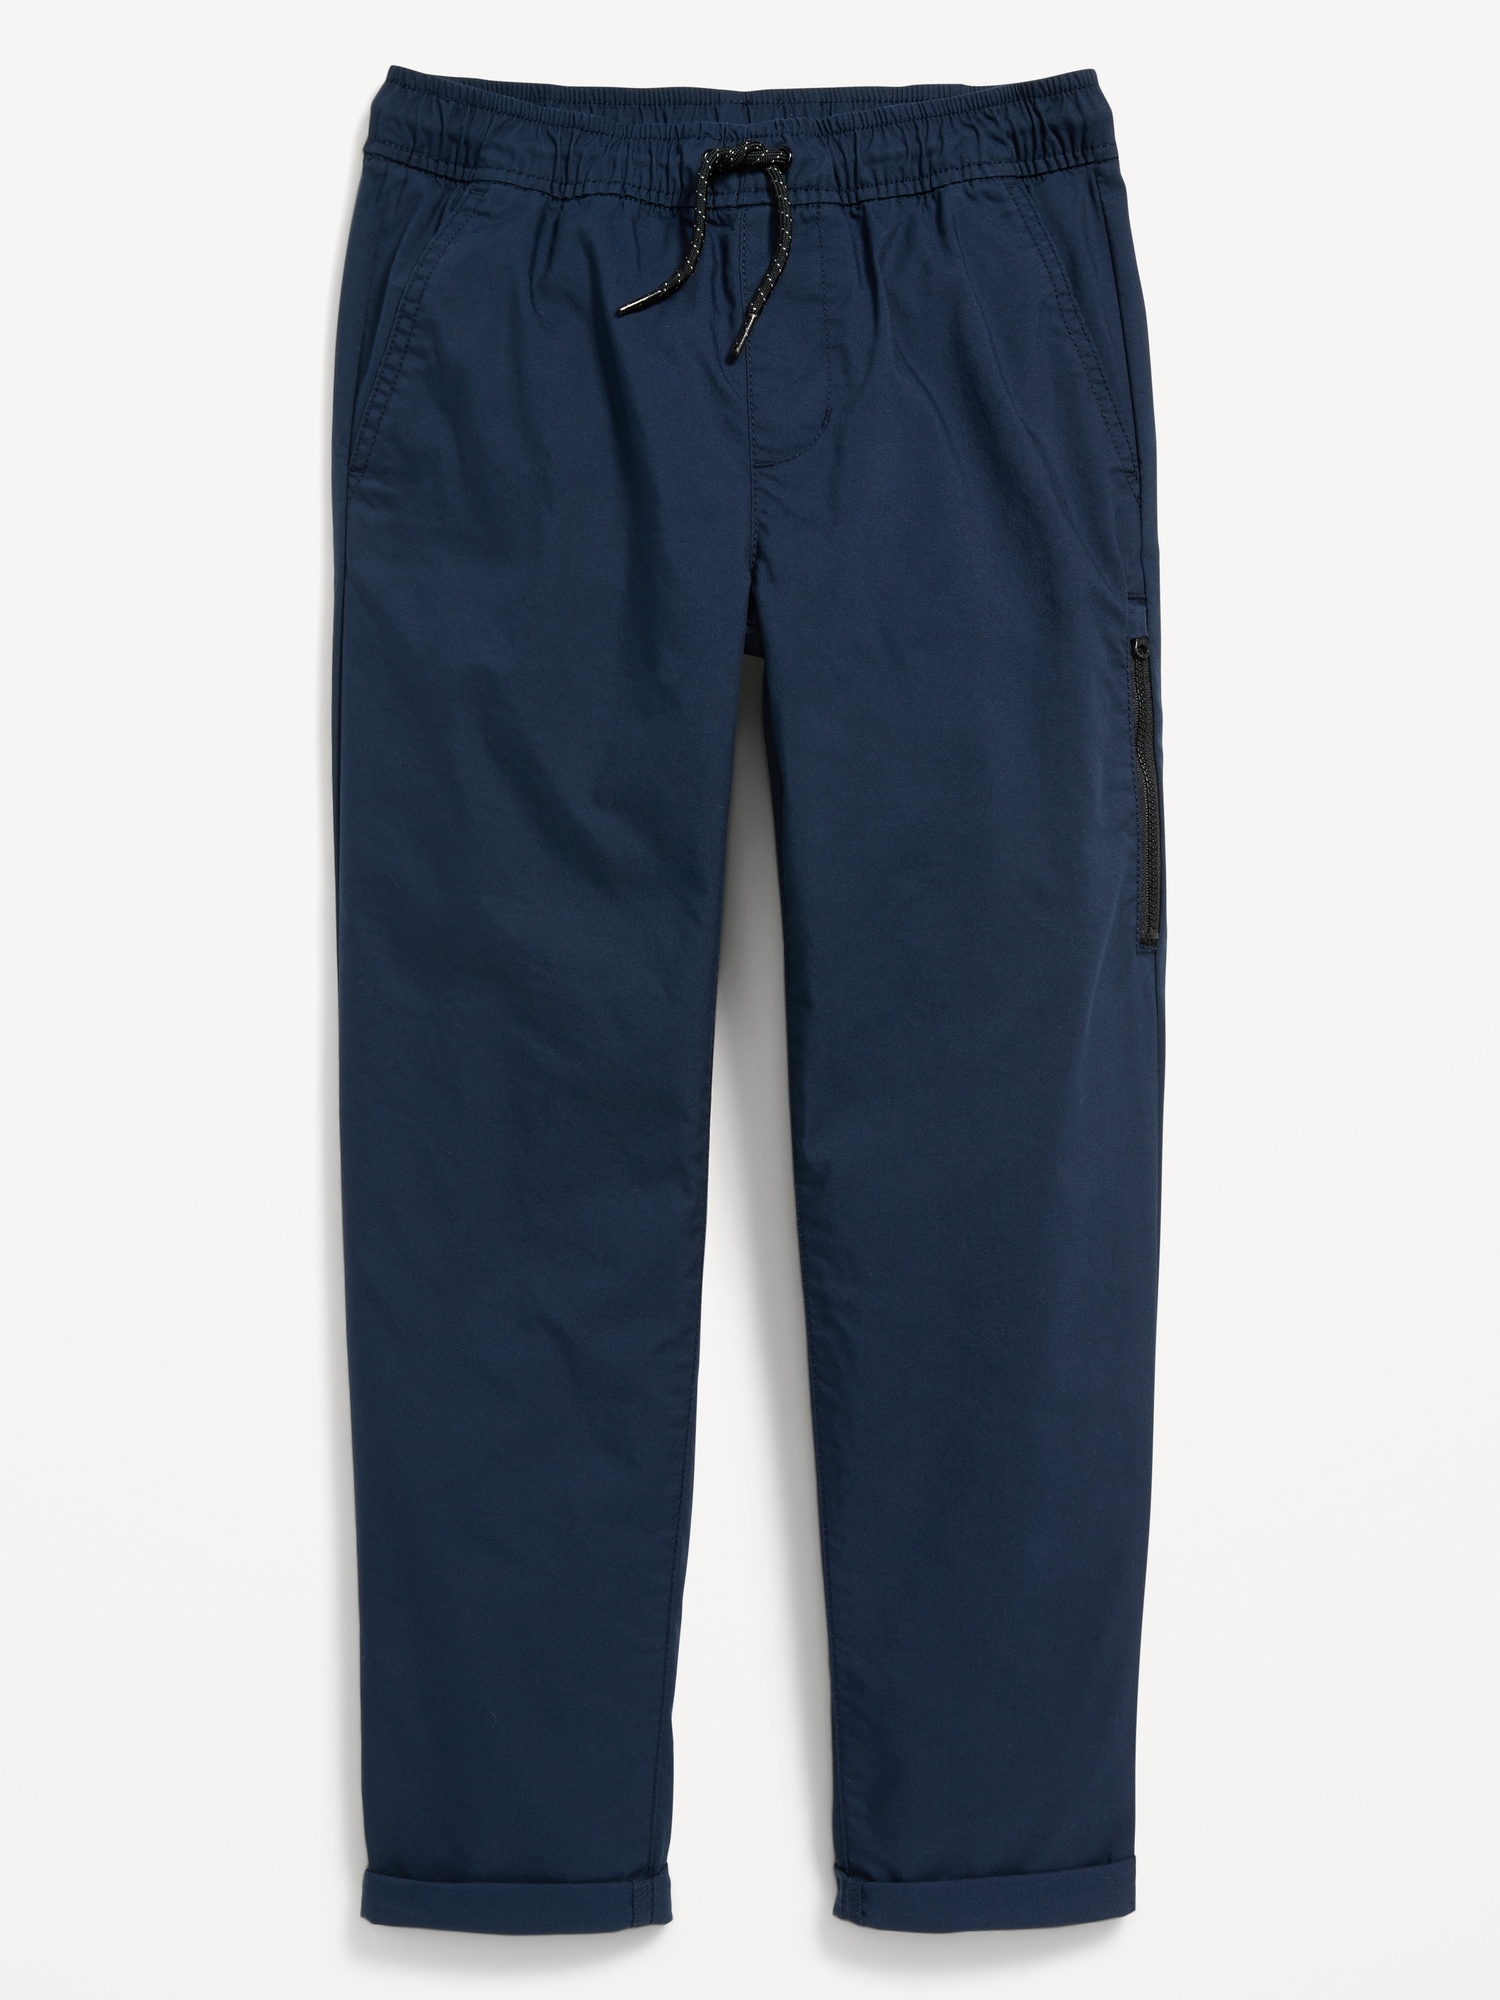 Old Navy Built-In Flex Tapered Tech Pants for Boys blue. 1